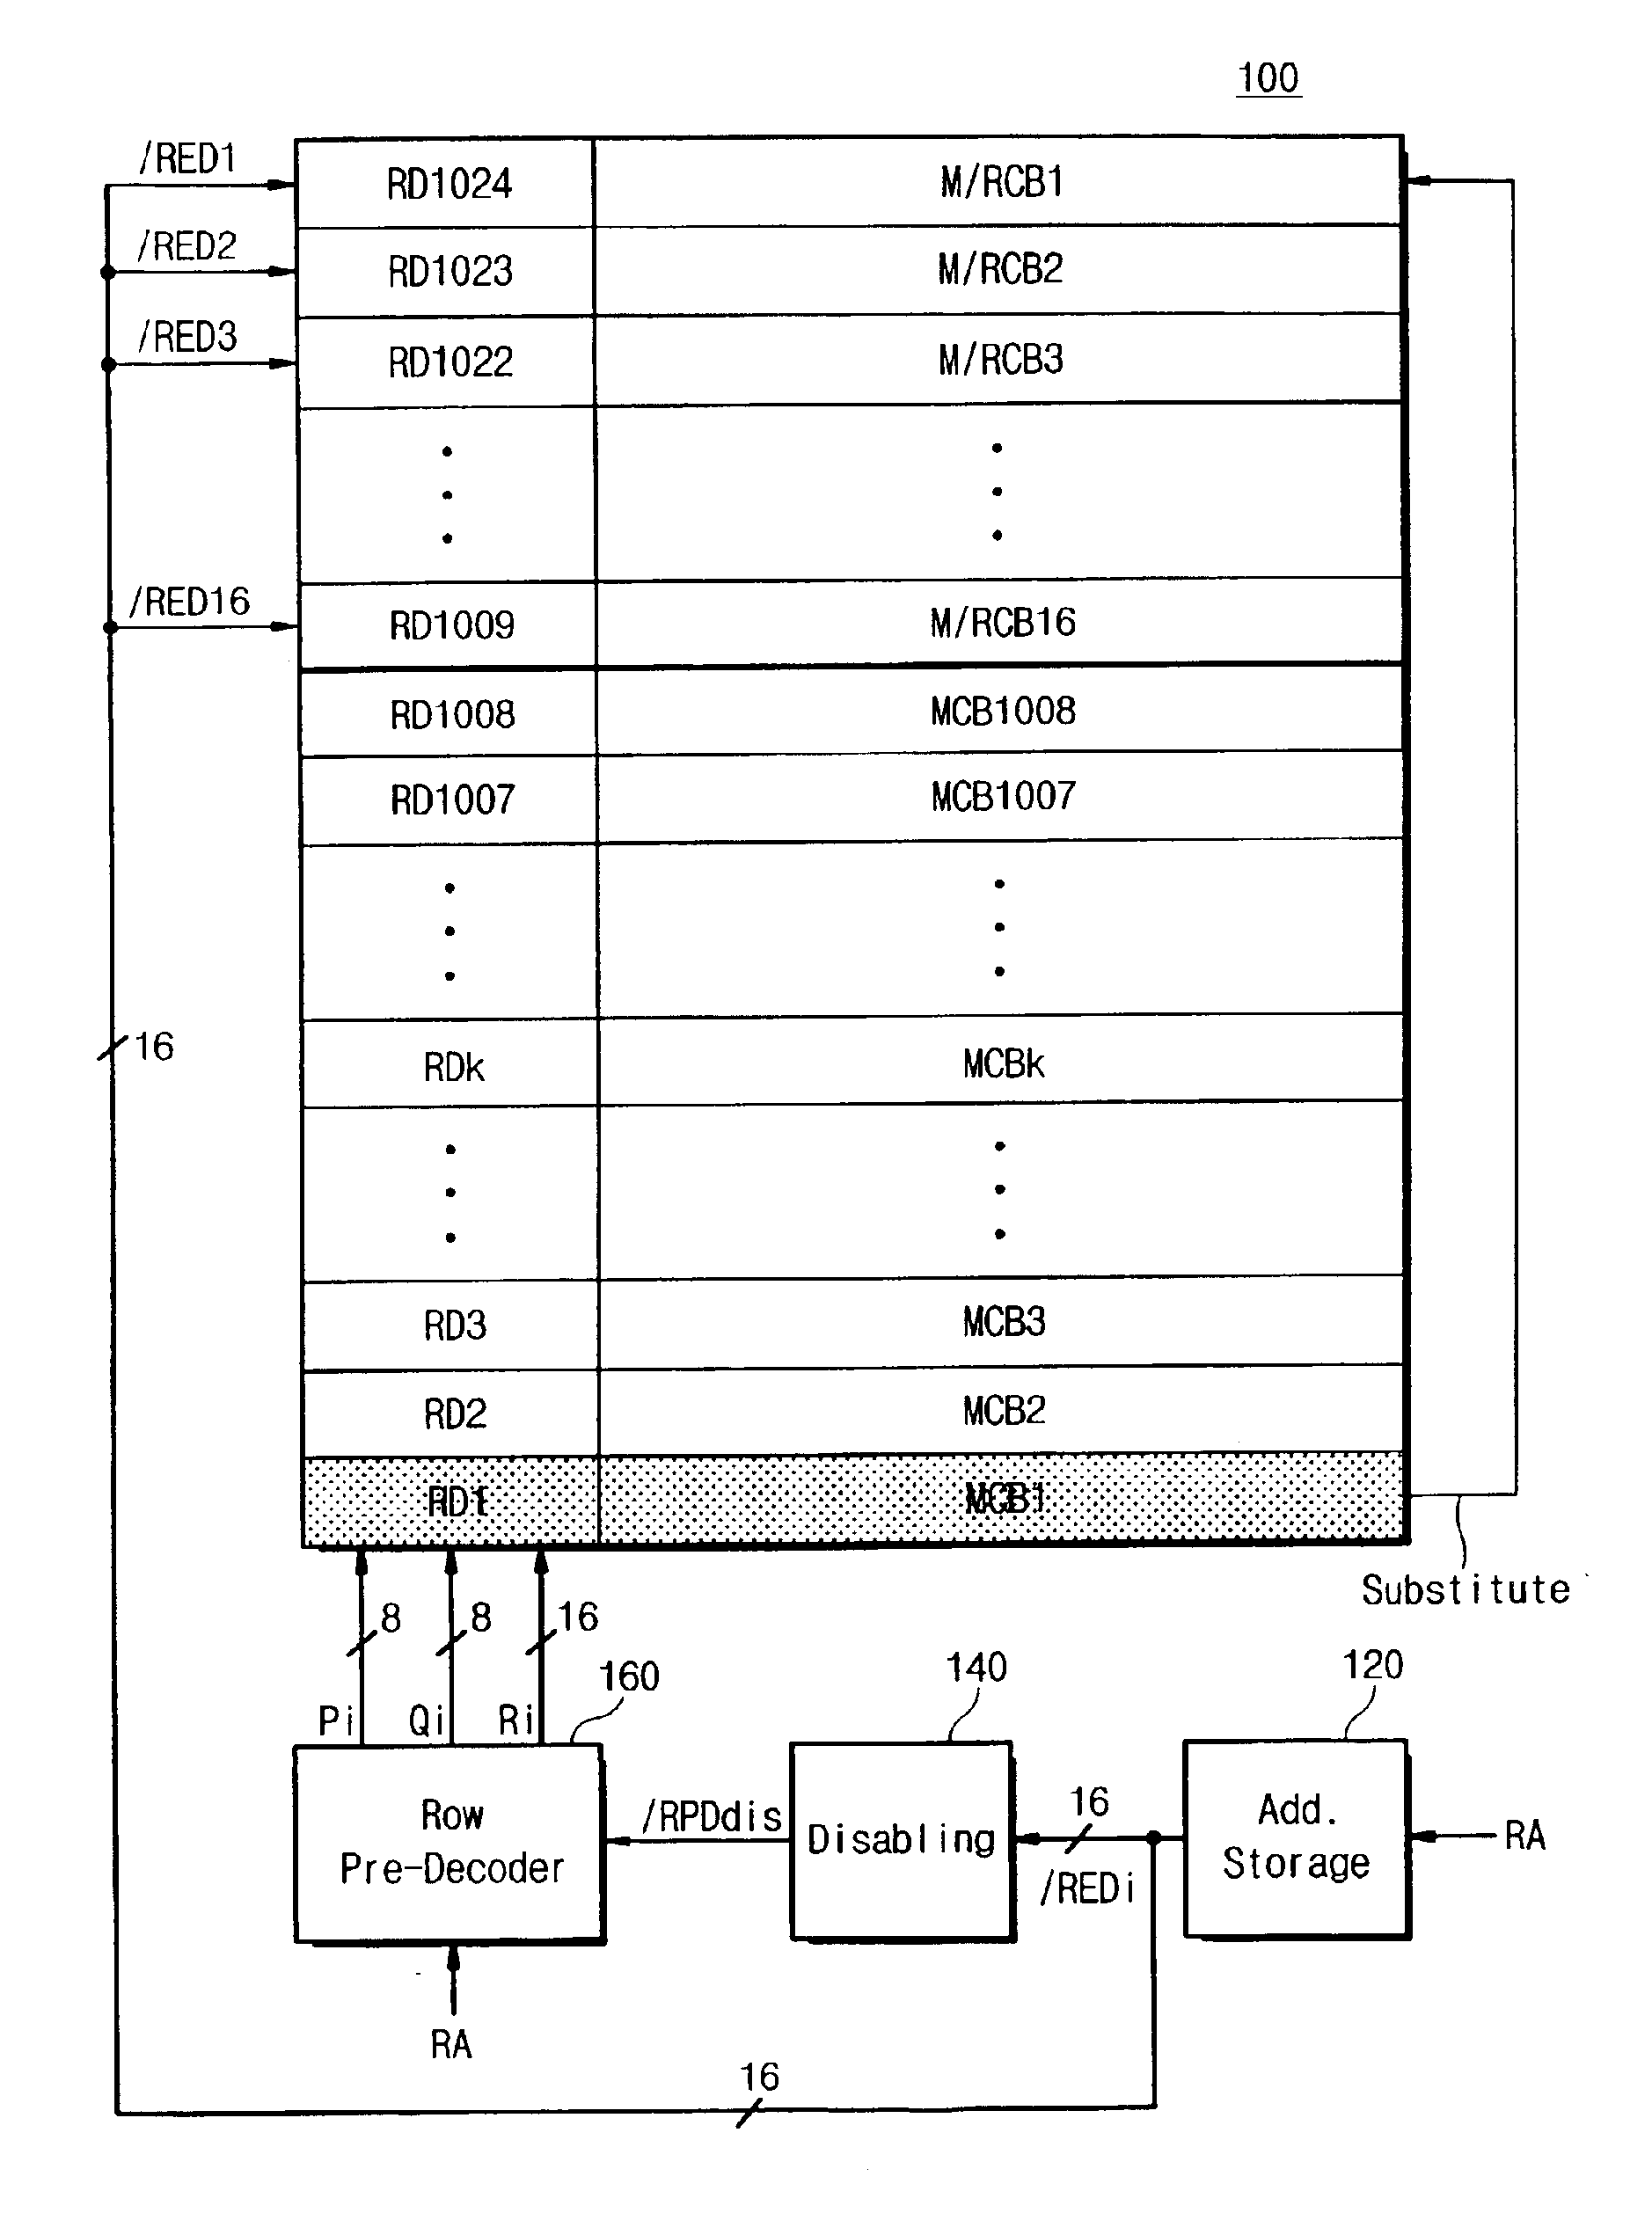 Semiconductor memory device with a flexible redundancy scheme